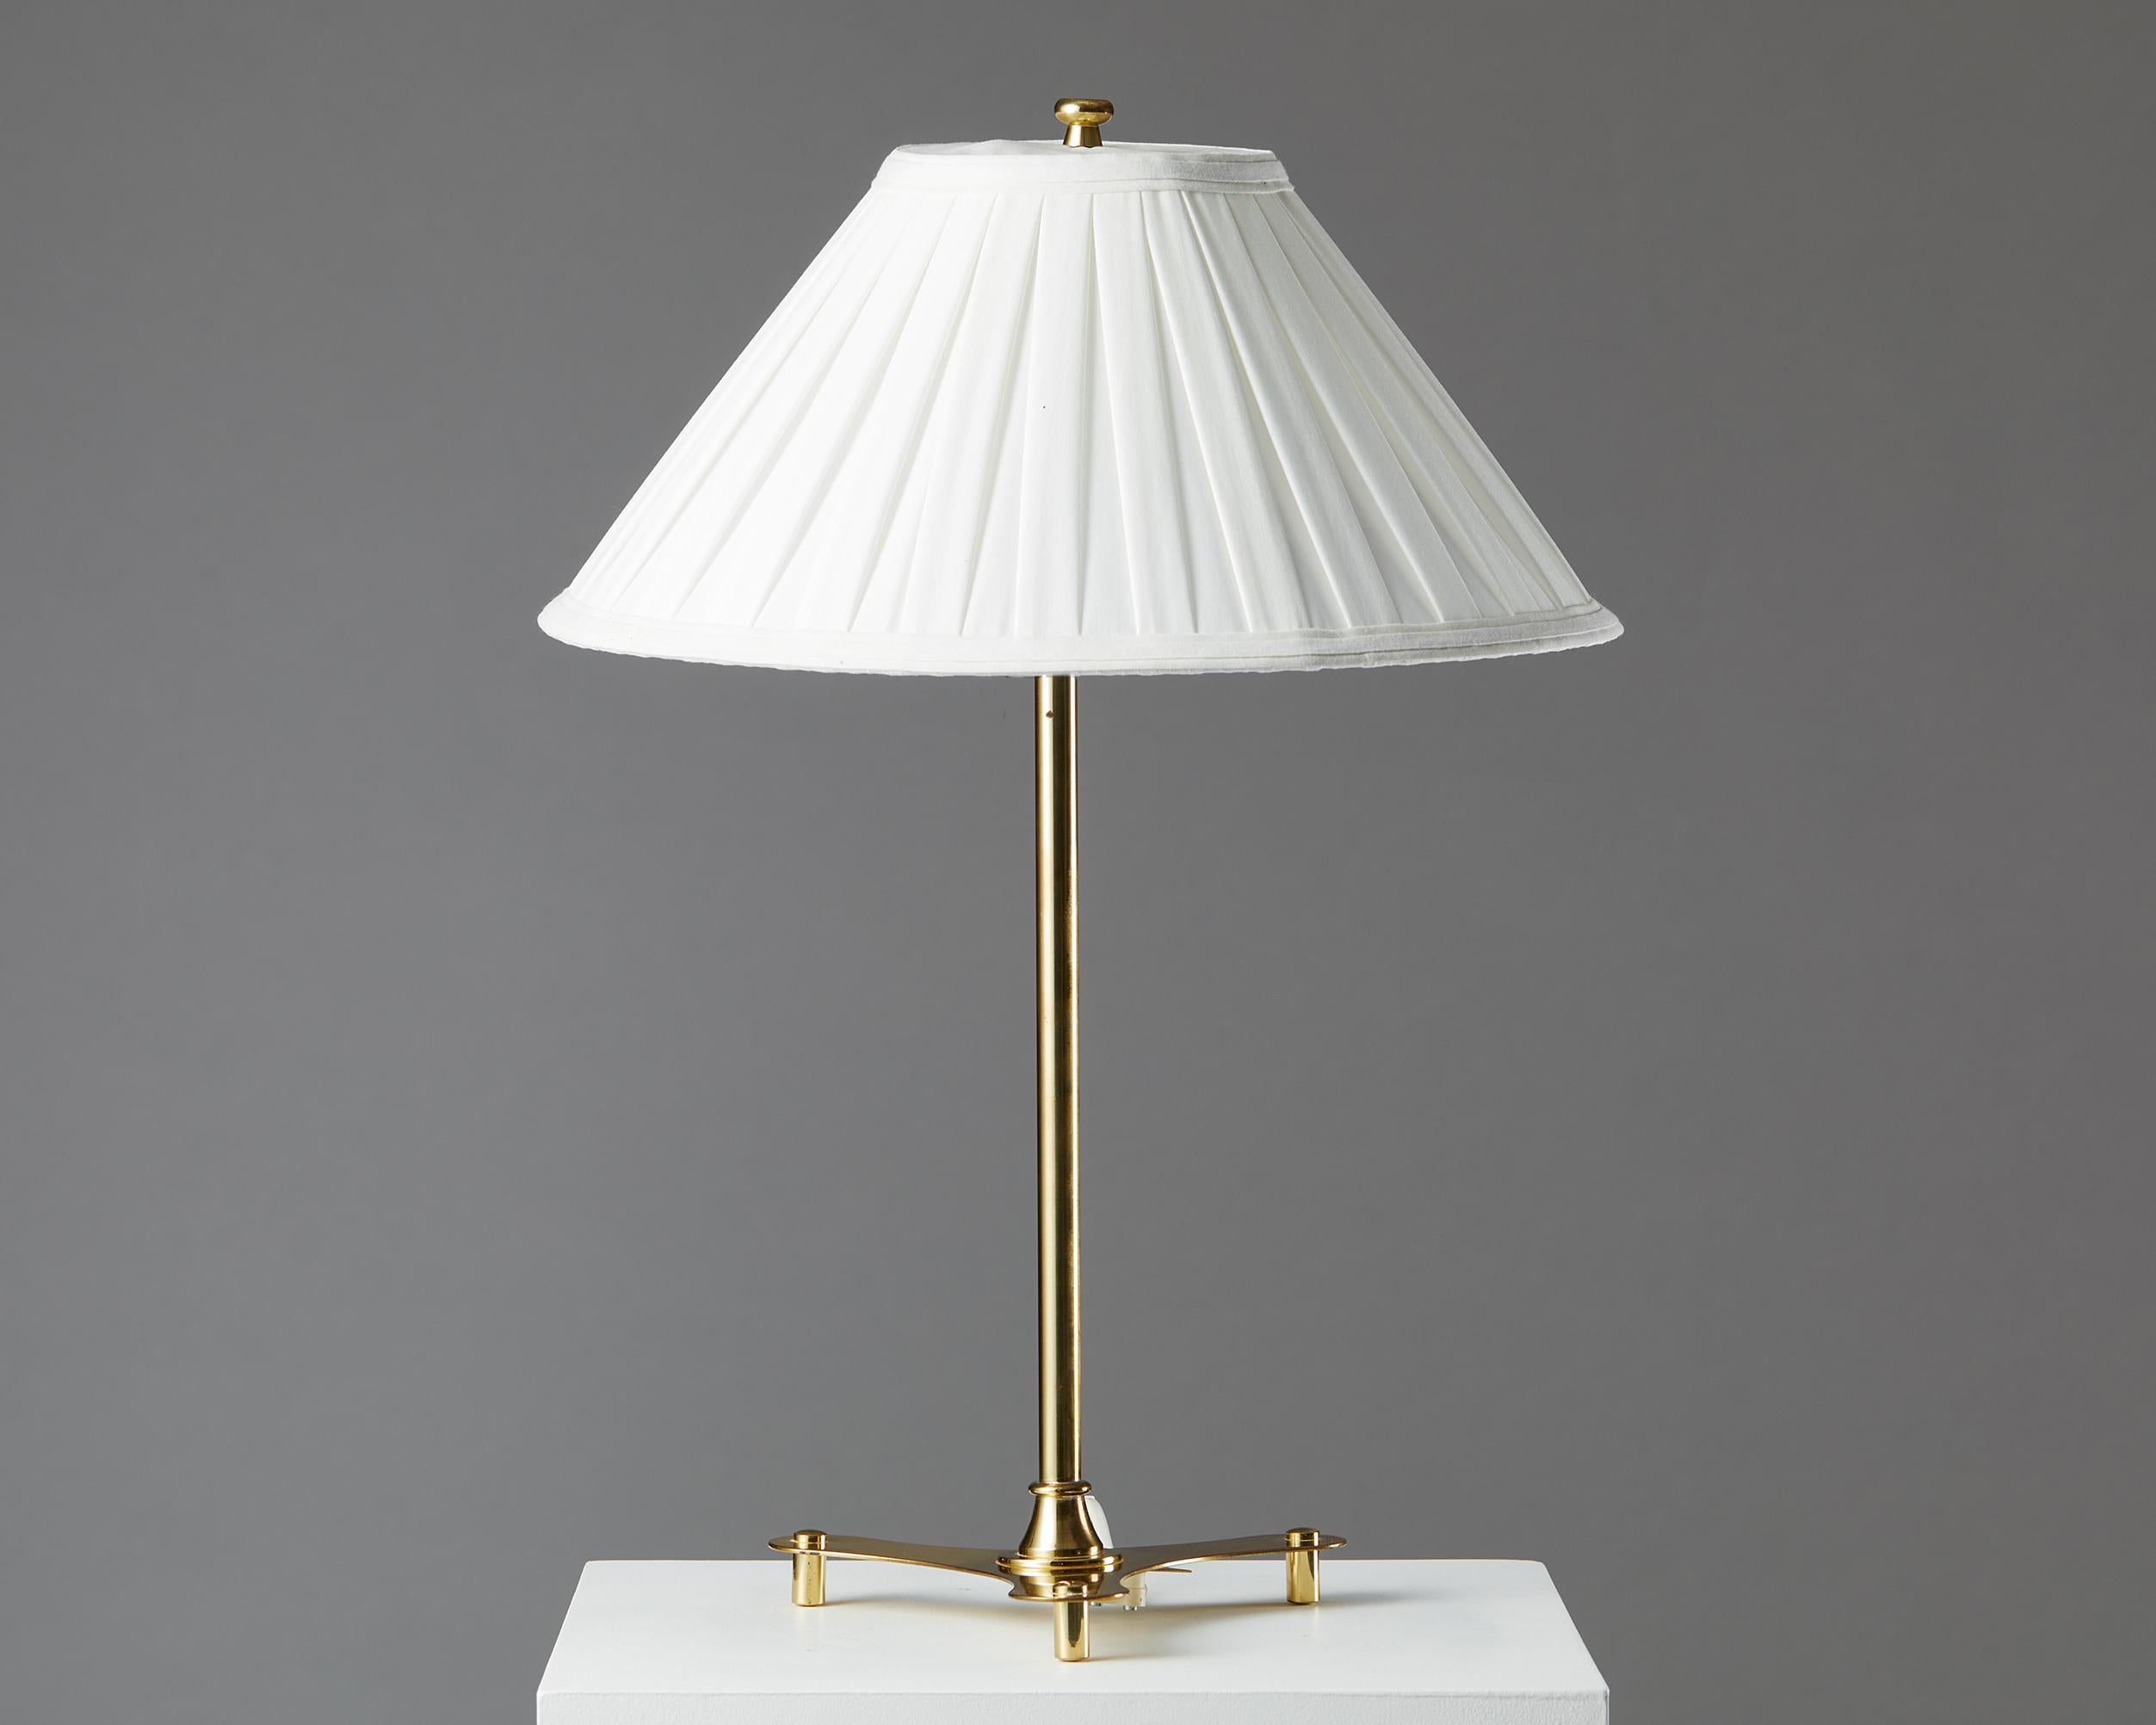 Table lamp model 2467 designed by Josef Frank for Svenskt Tenn,
Sweden. 1950s.
Brass with fabric shade.

Stamped.

Read our article “Josef Frank – Modernism undone” for further information about this pioneer of 20th-century Swedish